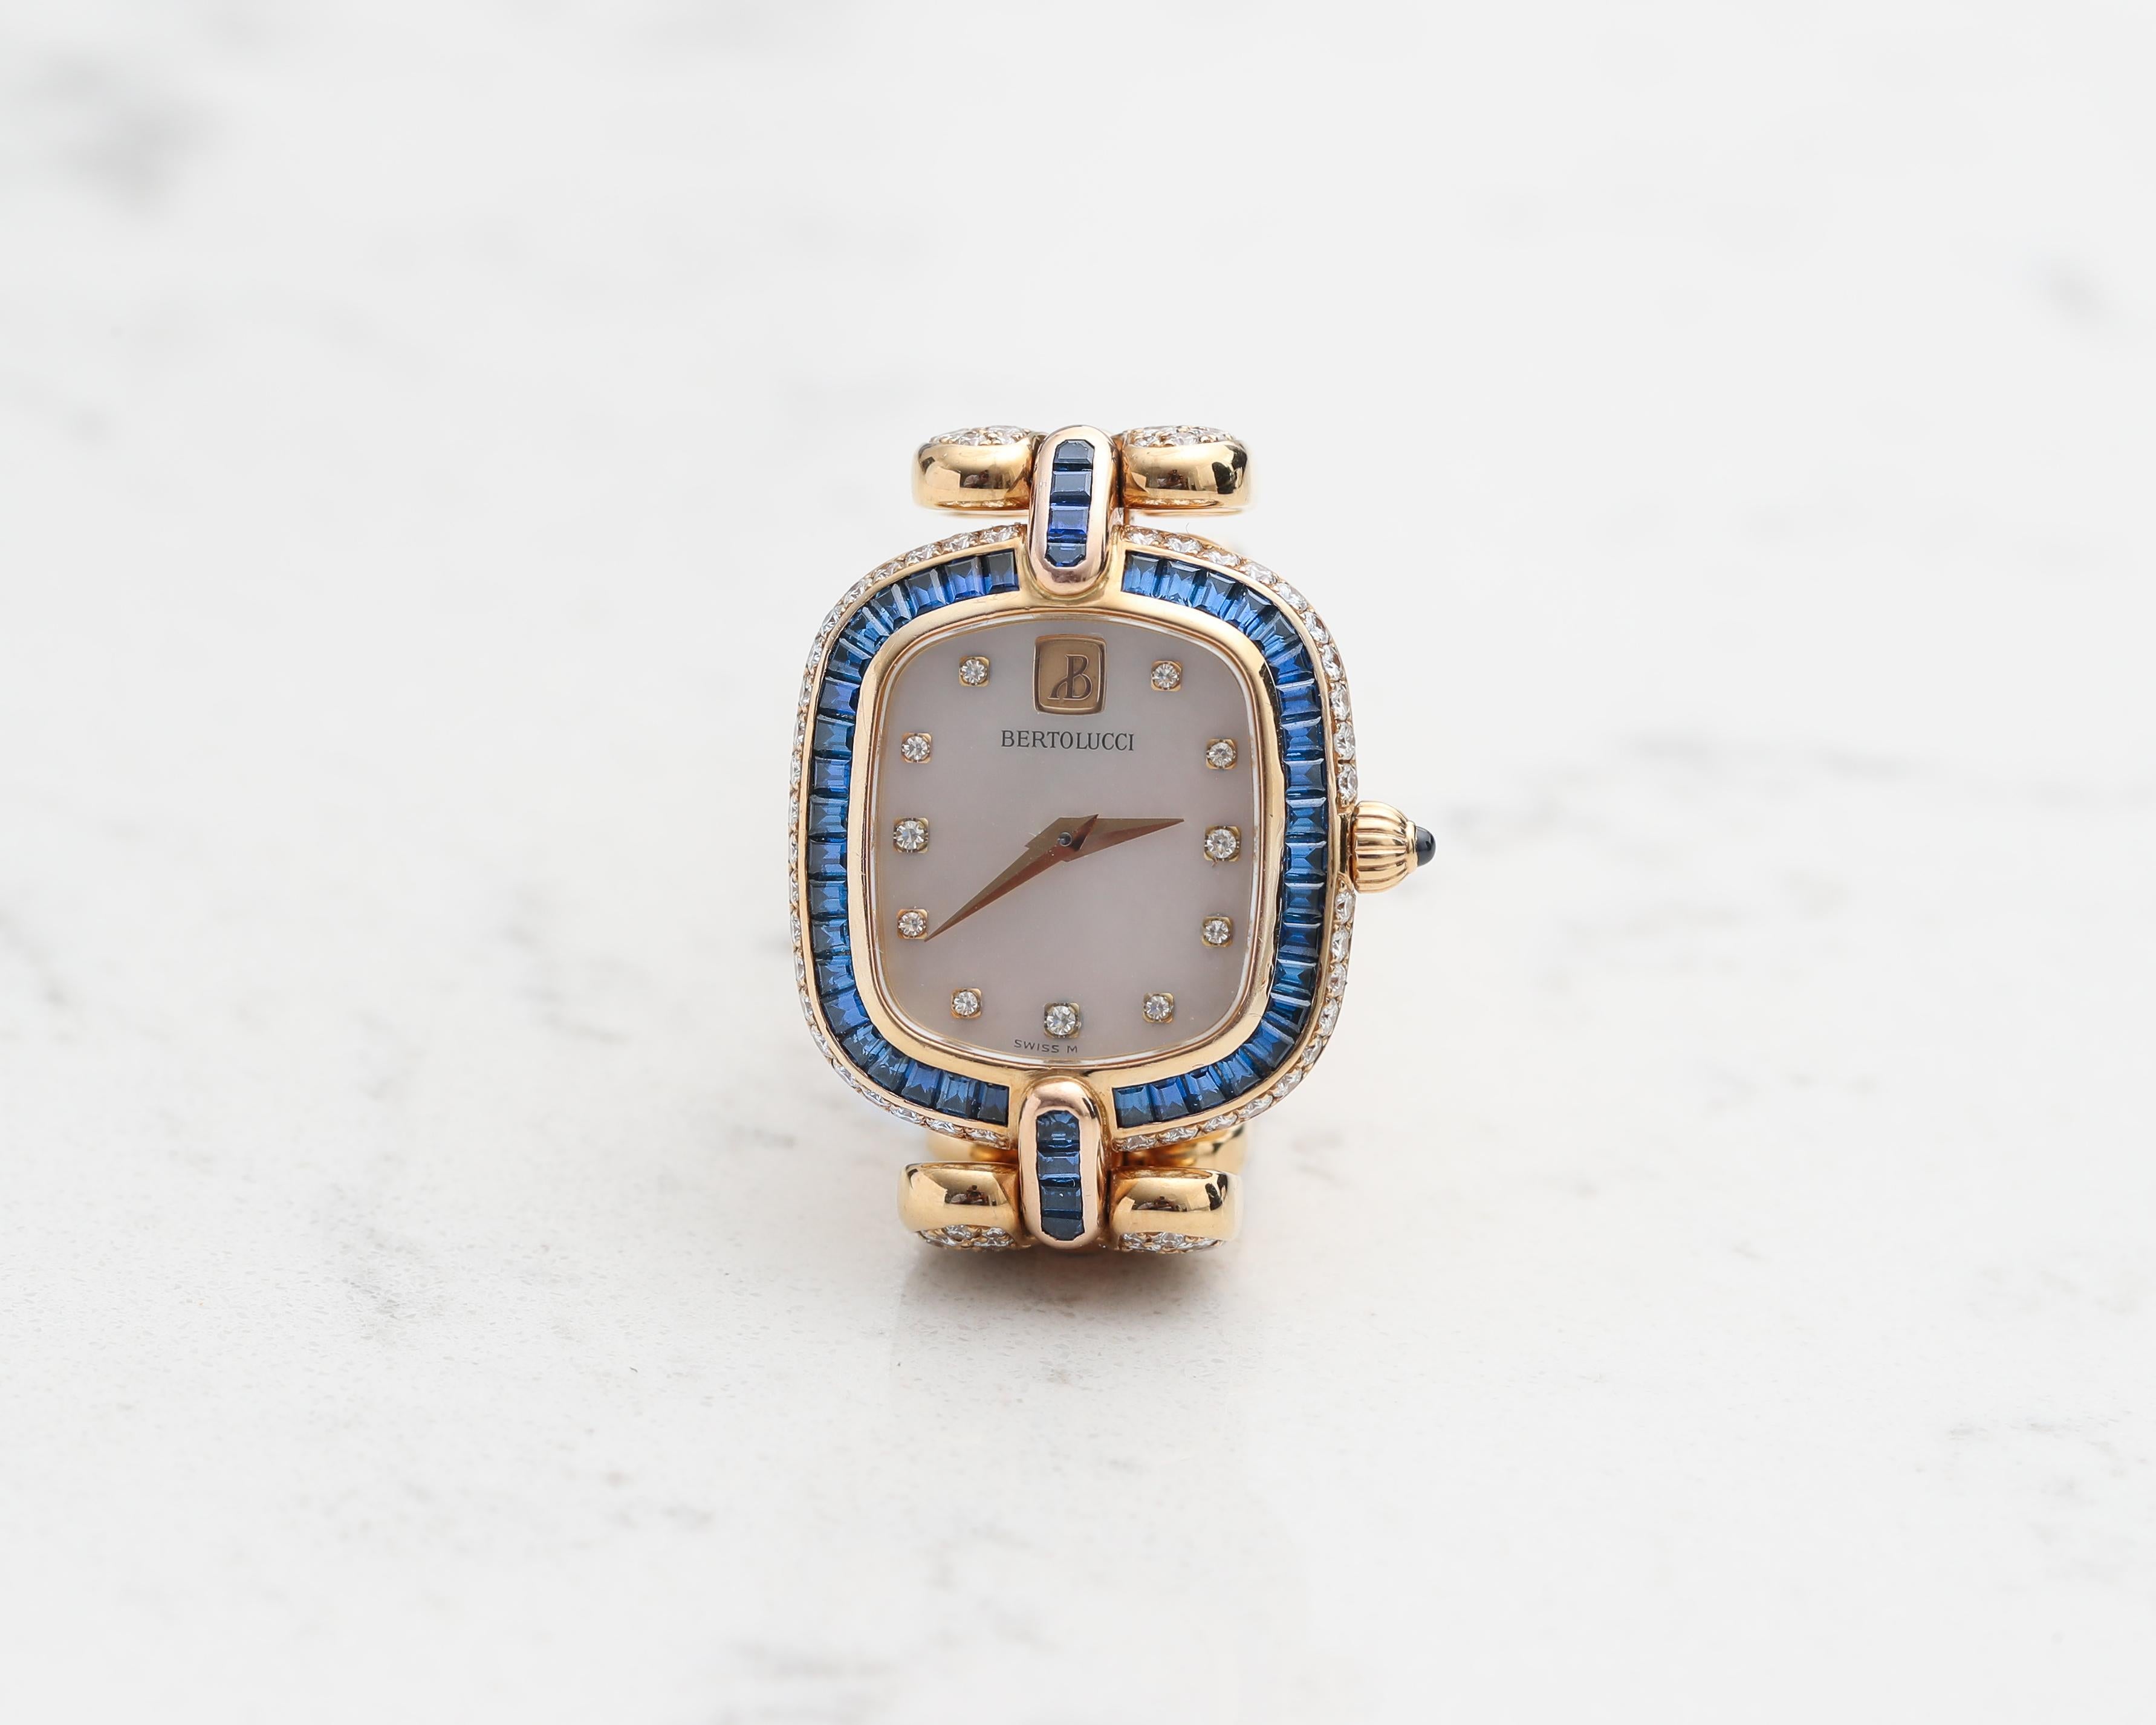 1990s Bertolucci Womens Wristwatch
Featuring Mother of Pearl Diamond Dial, crafted in 18 Karat Yellow Gold 

Diamond Details - 3 Carats, E-F Color, VVS Clarity, Round Brilliant Cut
Sapphire Details - 3 Carats, all custom cut Baguette diamonds 

Fits